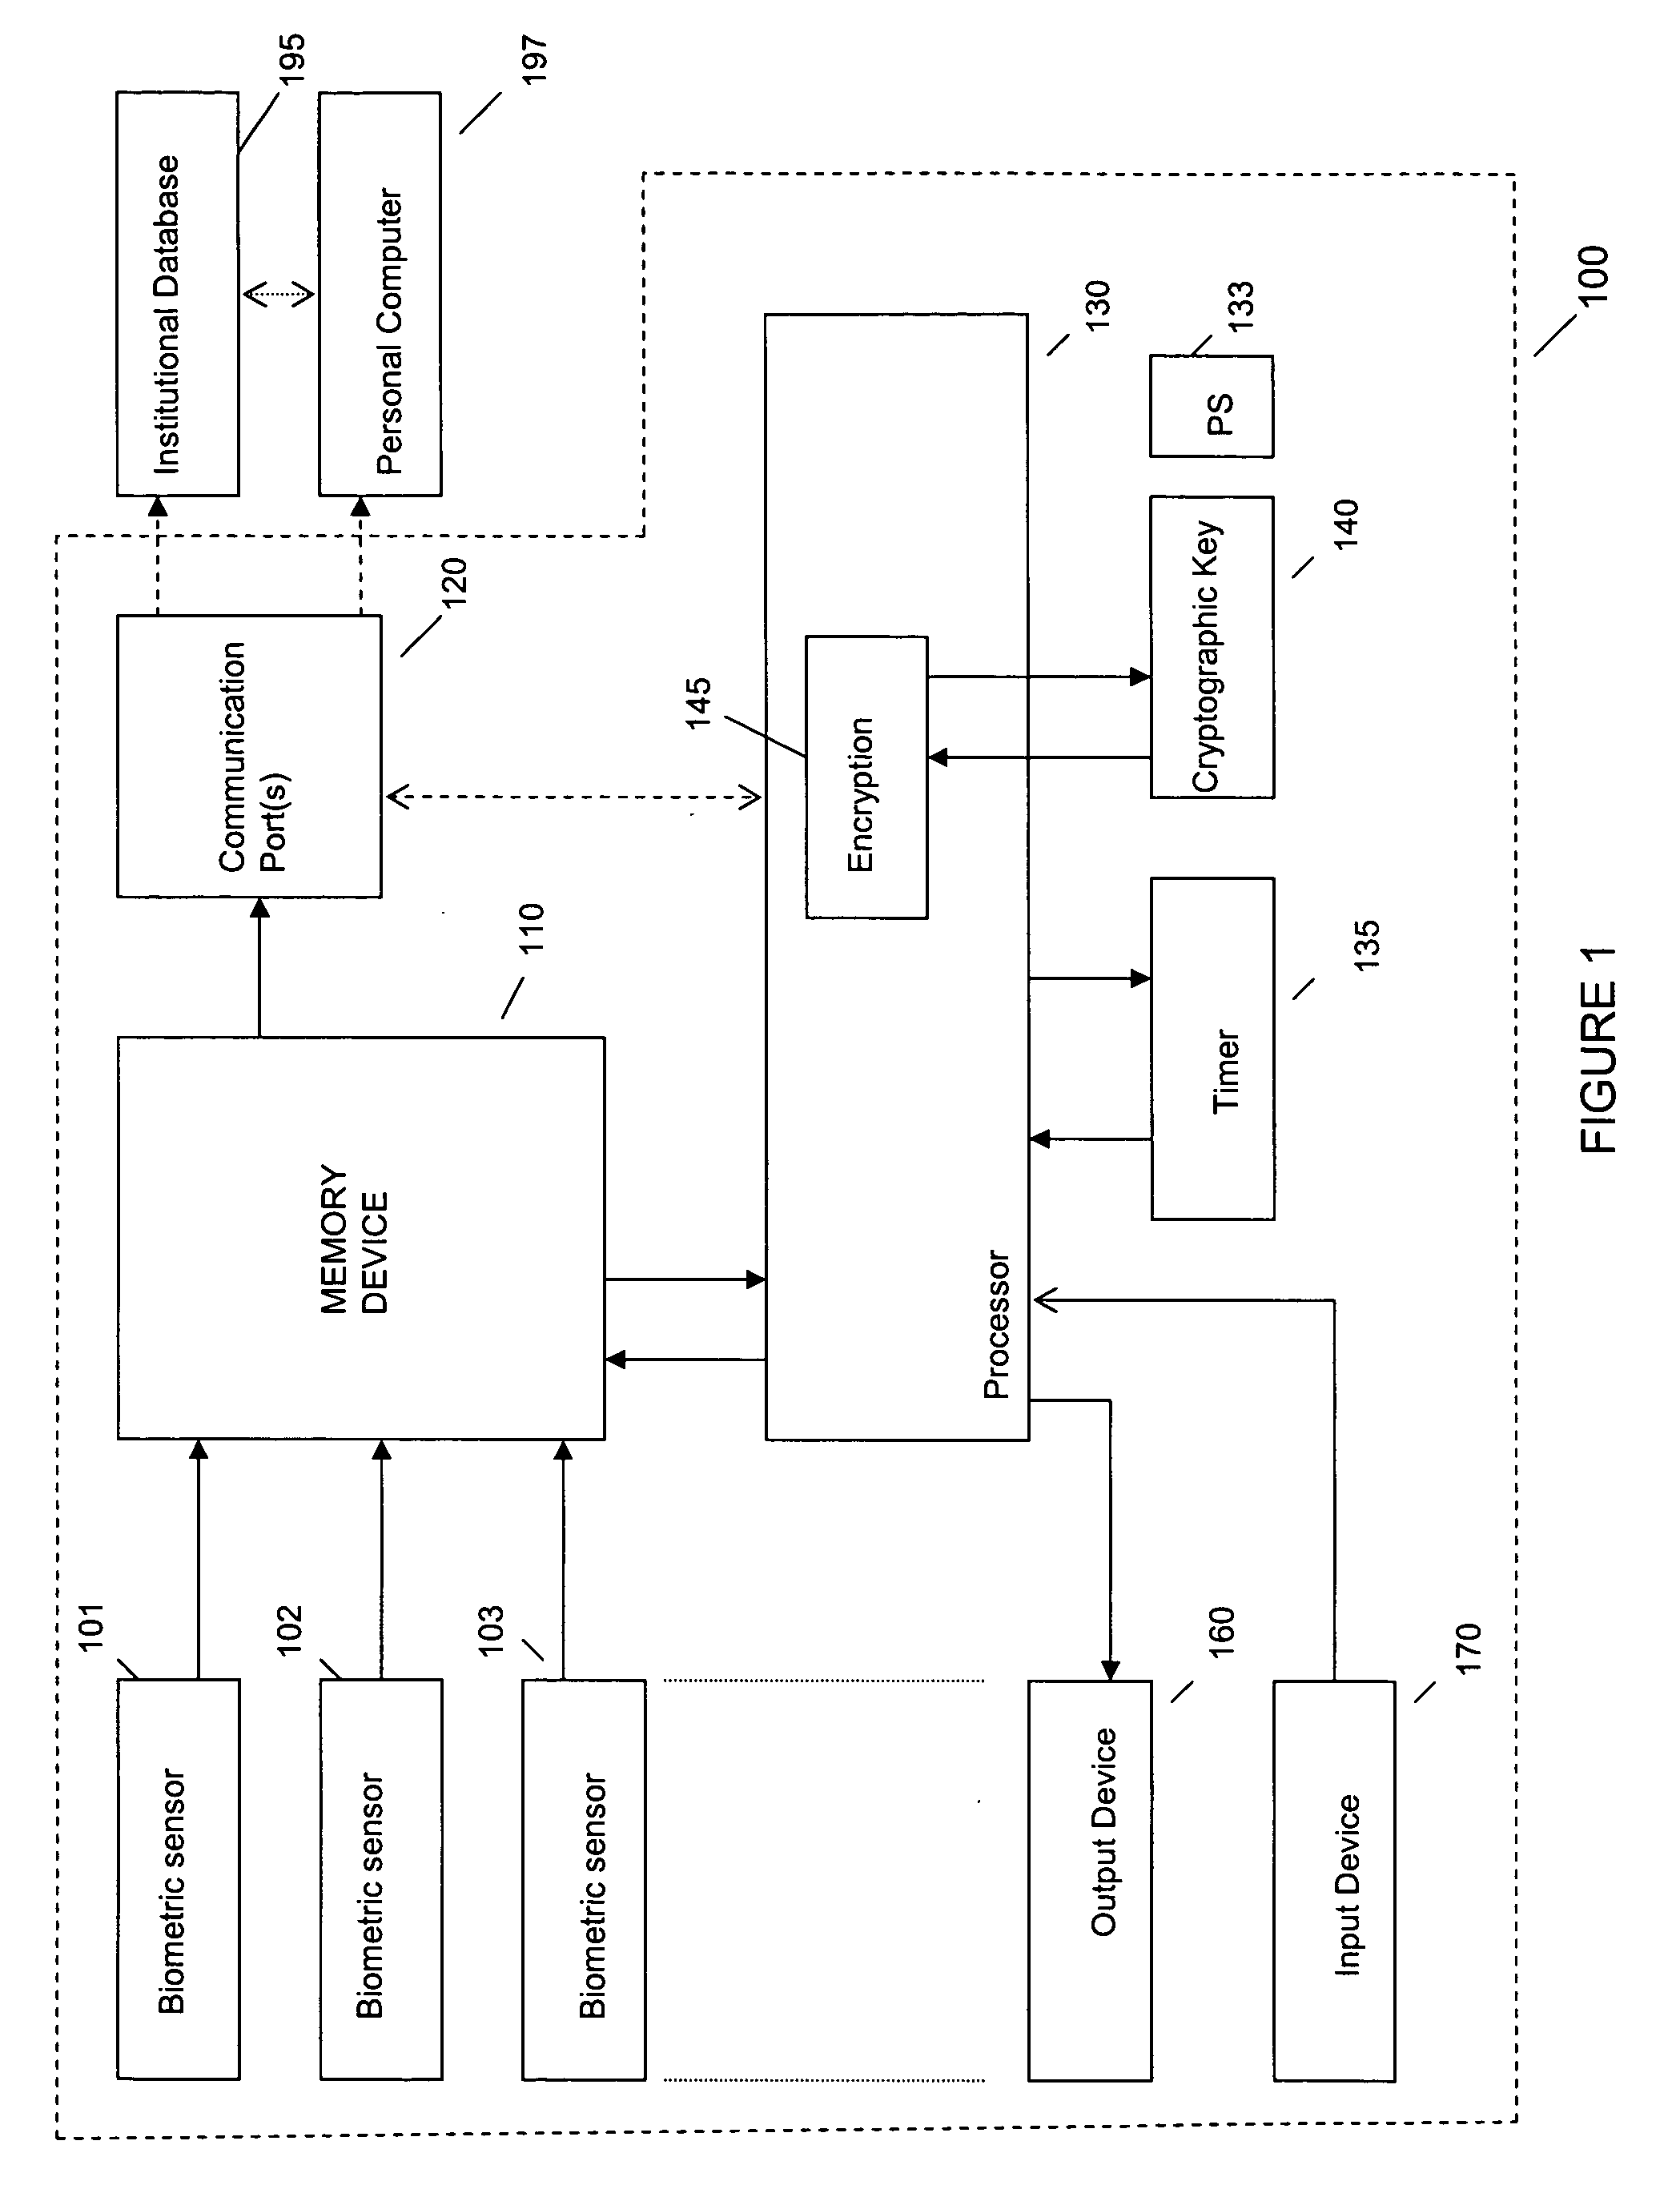 System and method for remote self-enrollment in biometric databases